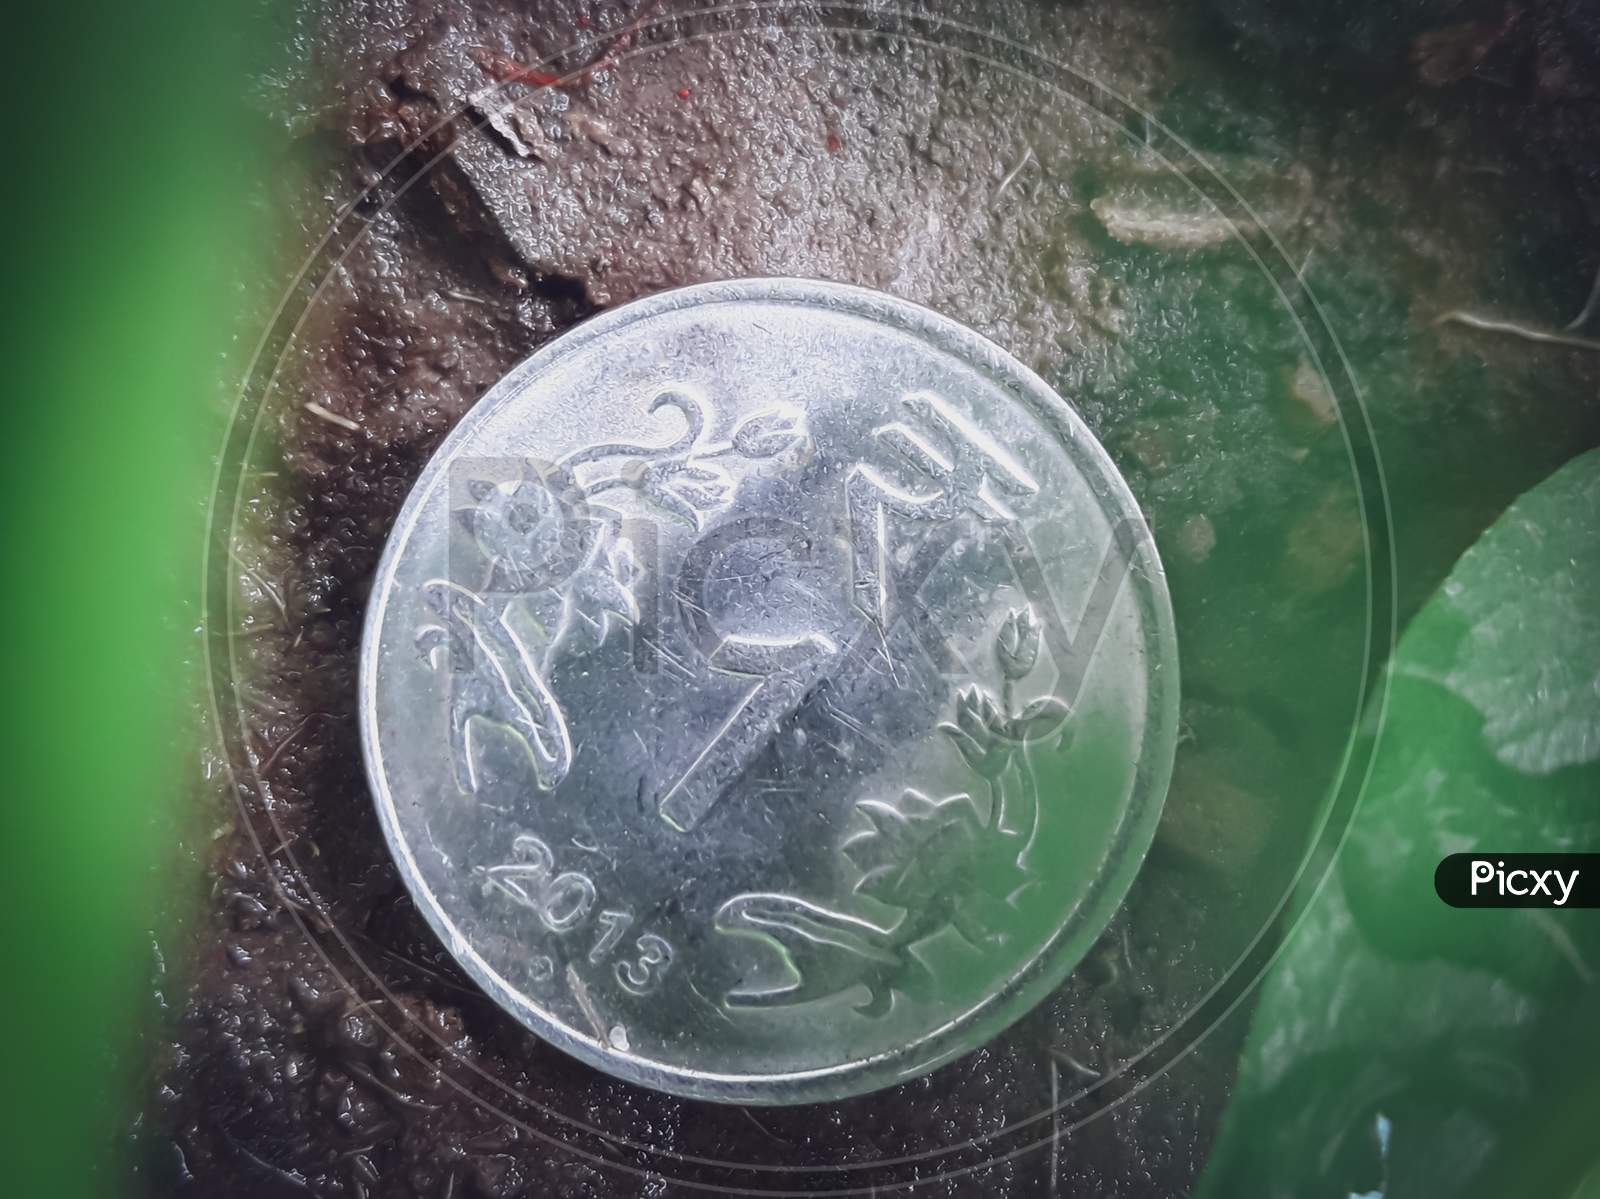 1 Rupee Coin In The Dust With Leaves